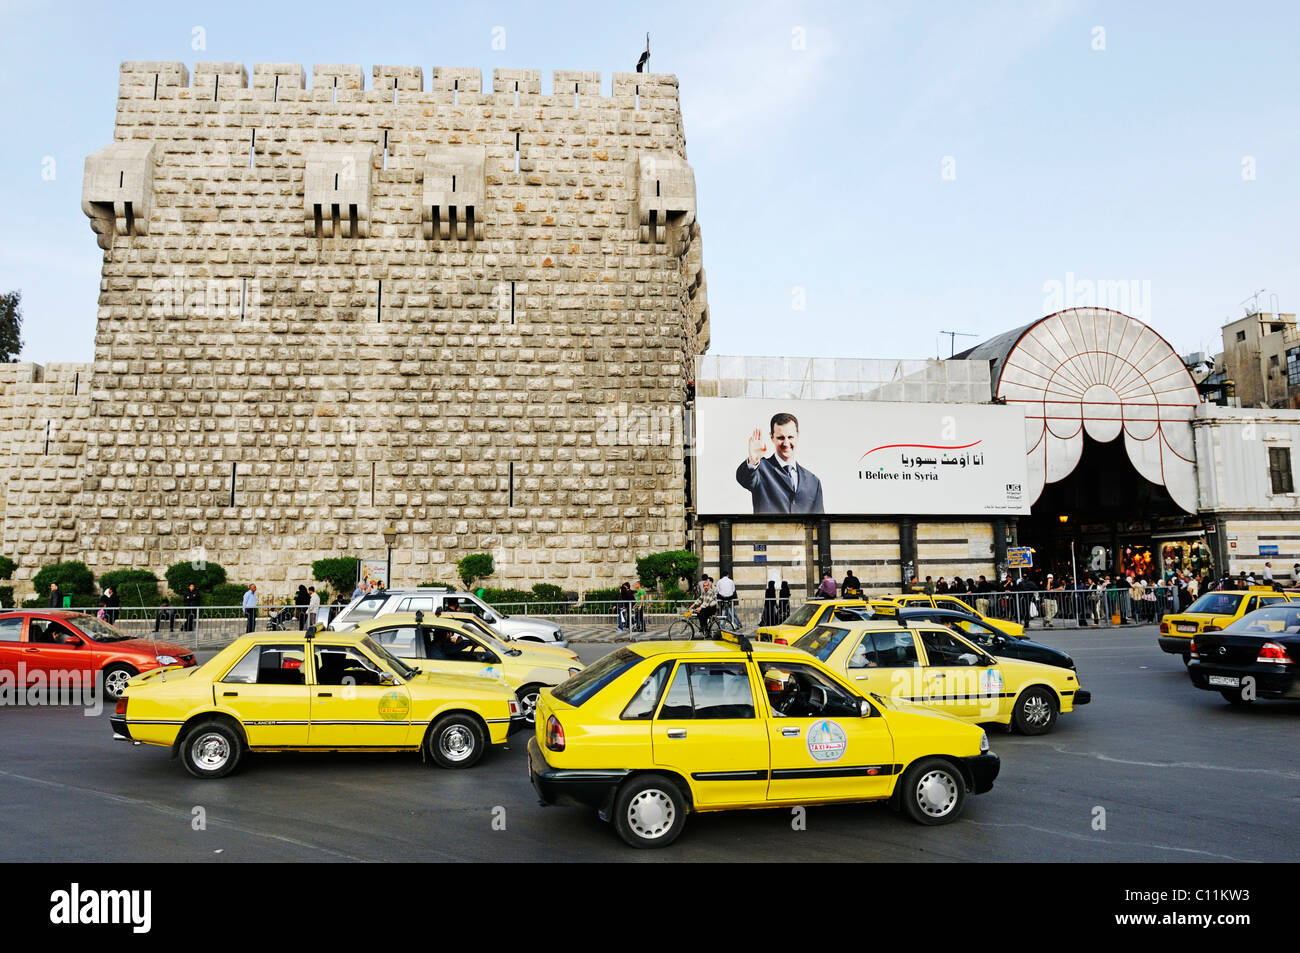 Taxis in front of the Citadel of Damascus, entrance to the bazaar, souk on the right, historic centre of Damascus Stock Photo